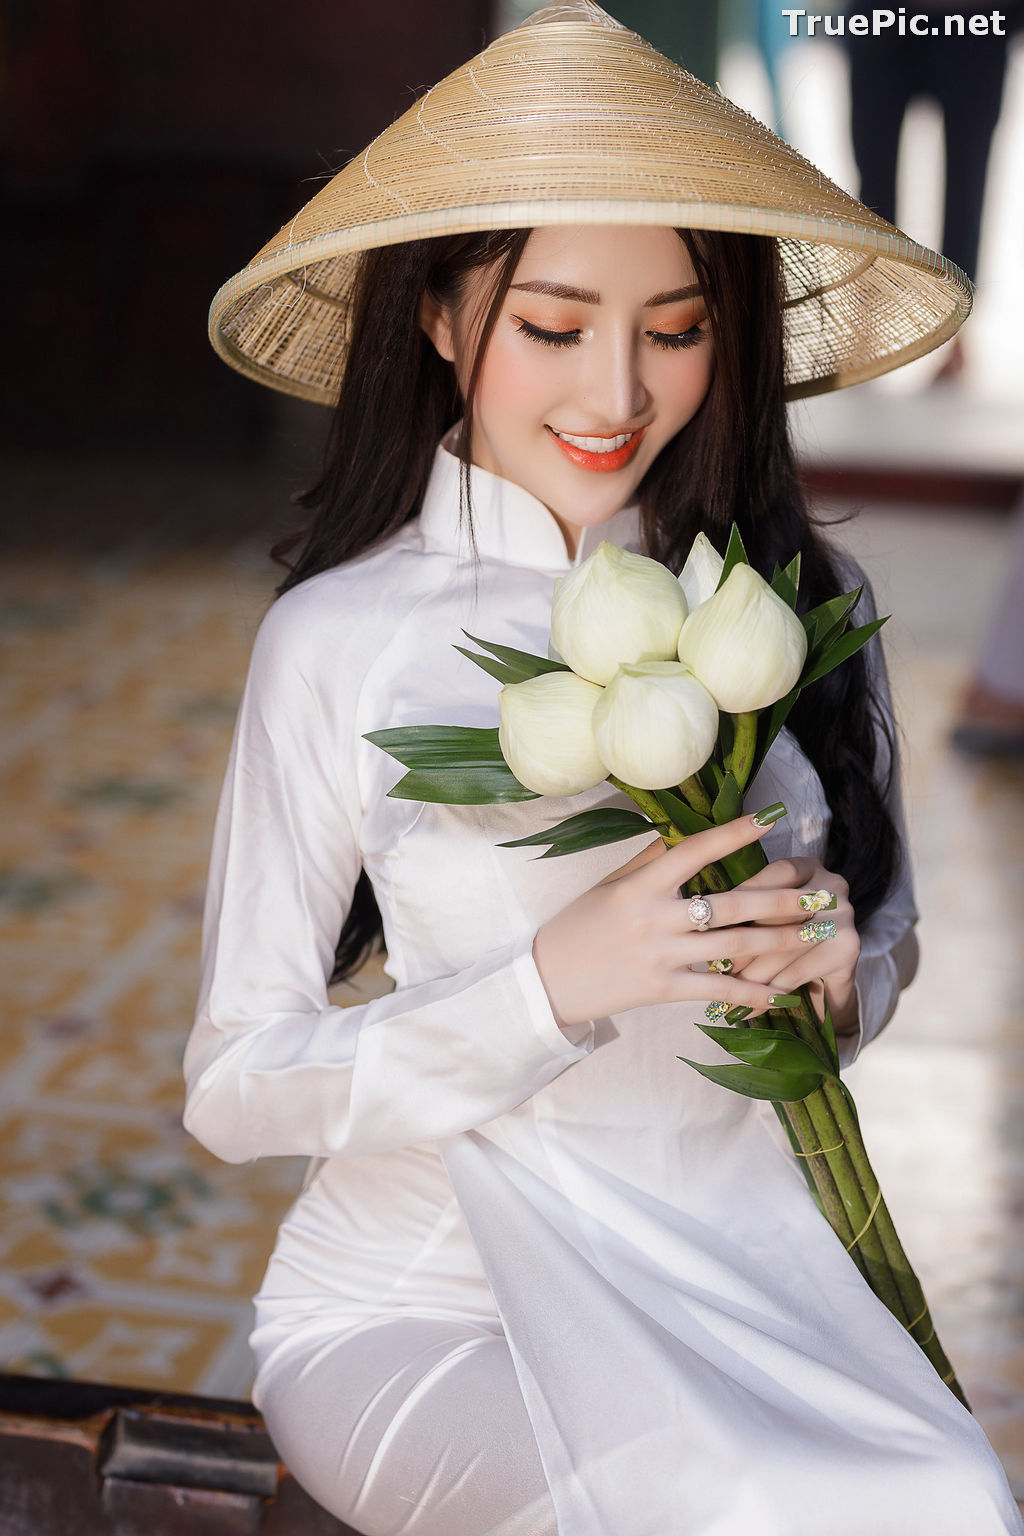 Image The Beauty of Vietnamese Girls with Traditional Dress (Ao Dai) #2 - TruePic.net - Picture-31